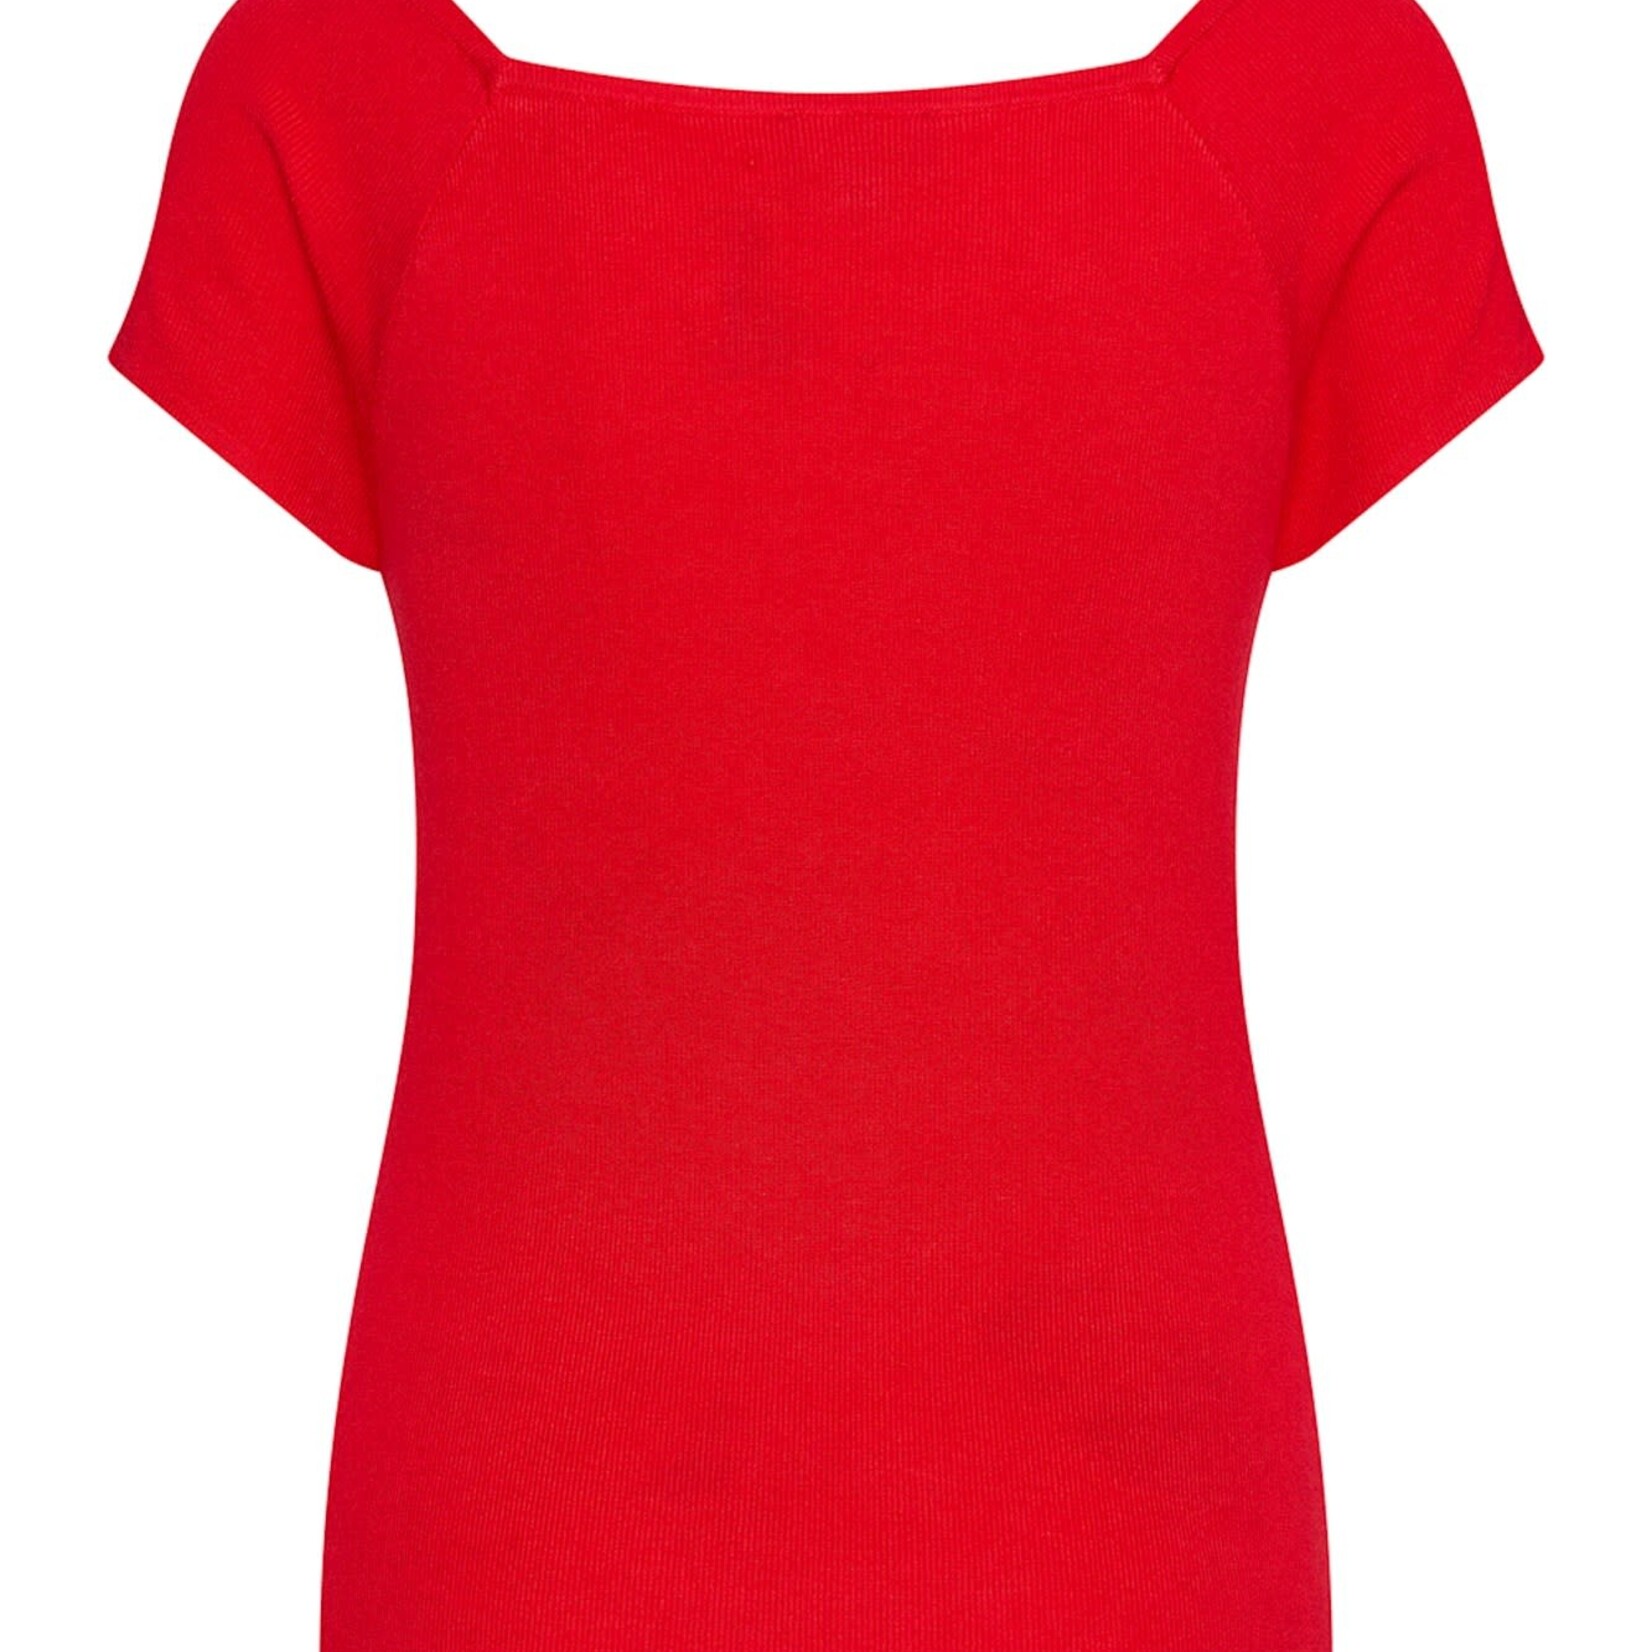 ZILCH ZILCH SHORT SLEEVE BAMBOO TOP TRUE RED